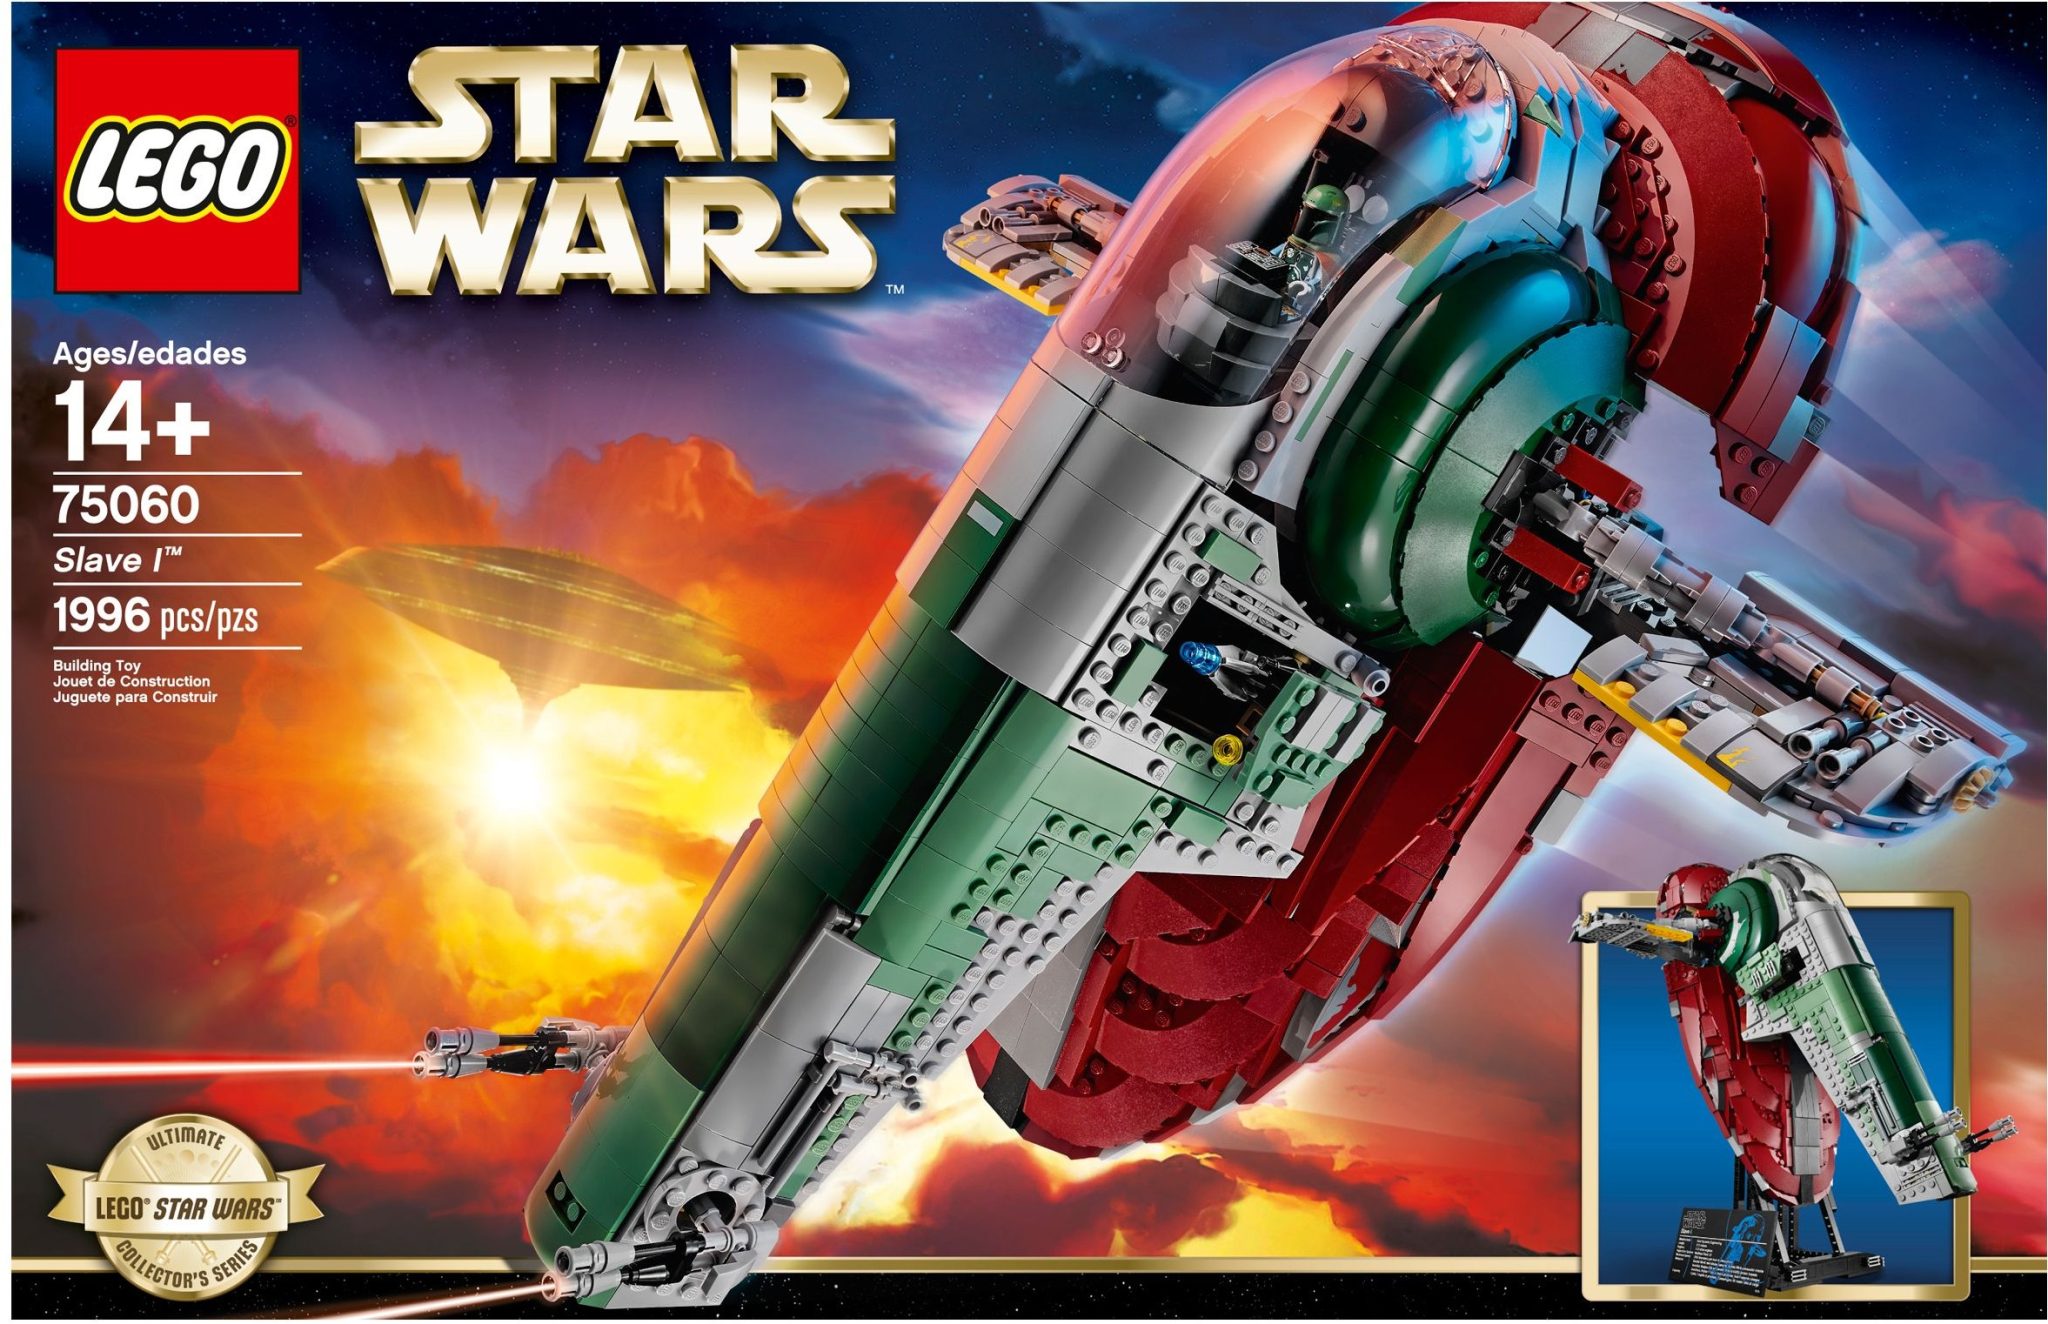 Five possibilities for LEGO Star Wars May the Fourth 2023